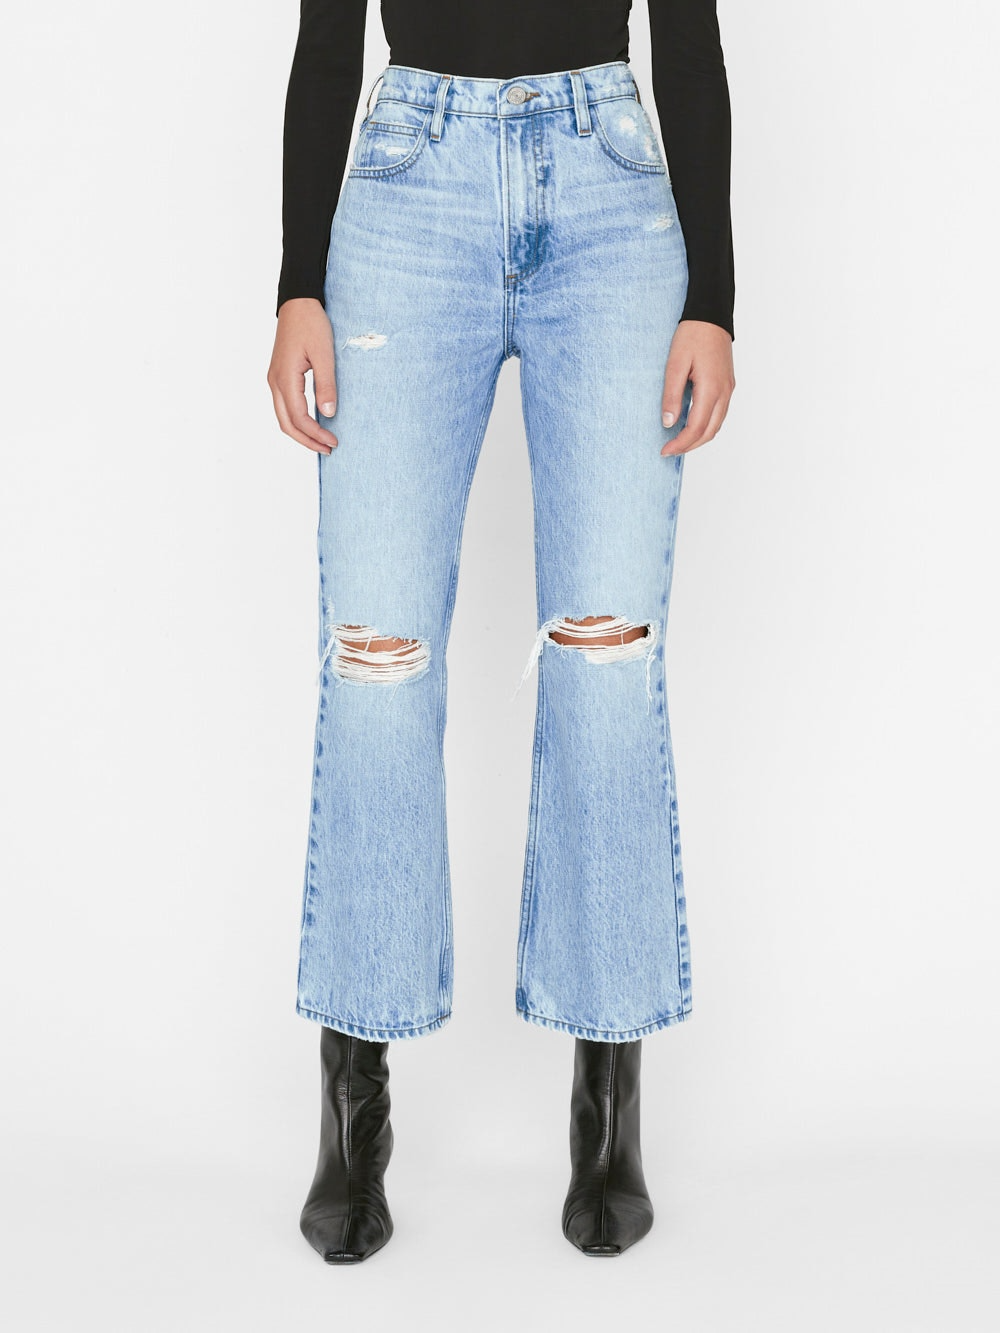 Le High 'N' Tight high-rise jeans in blue - Frame